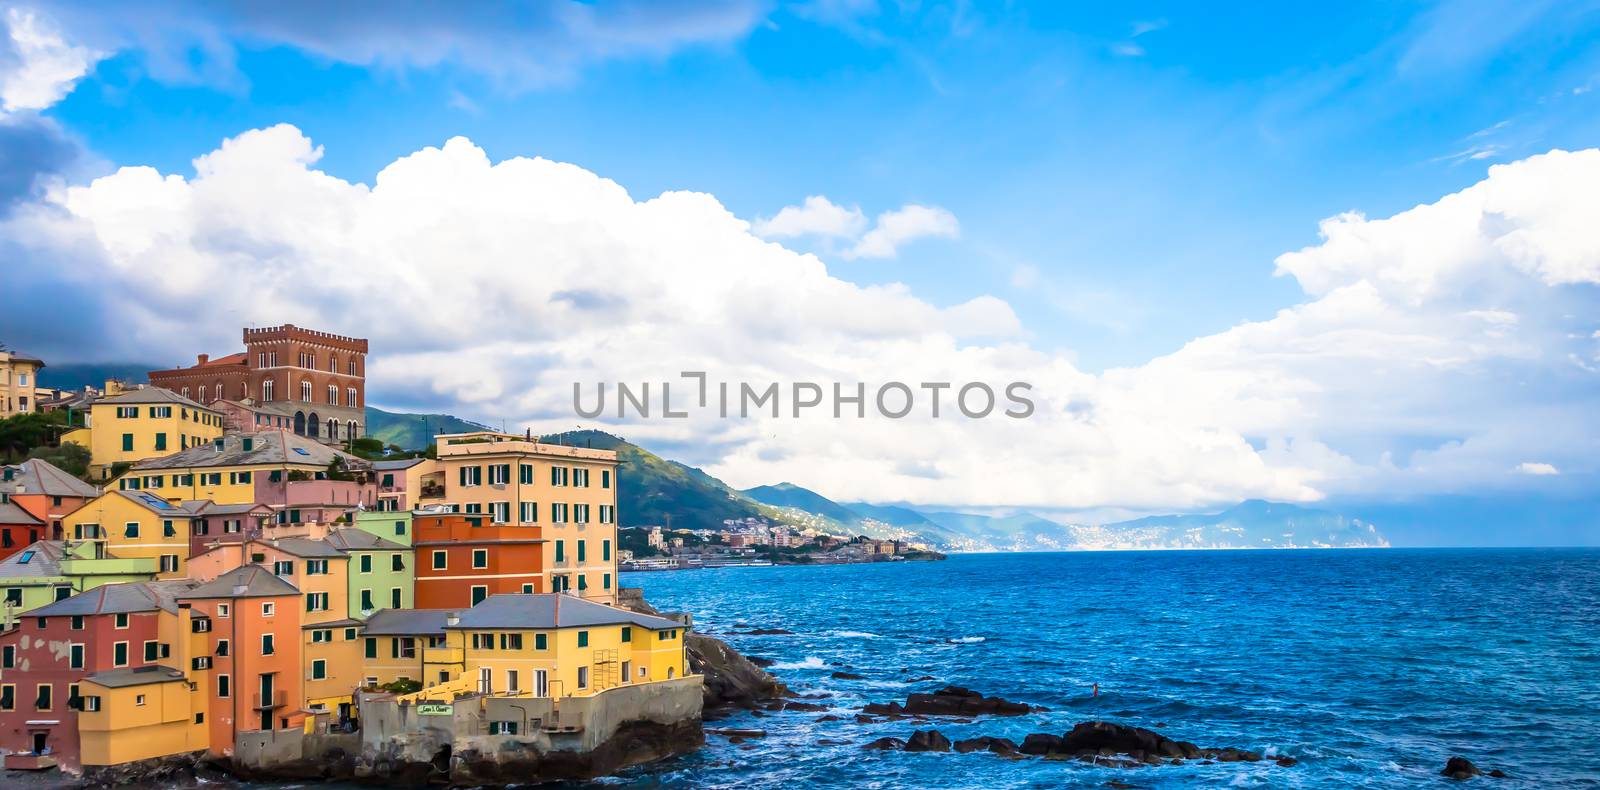 GENOA, ITALY - CIRCA AUGUST 2020: Boccadasse marina panorama, village on the Mediterranean sea with colourful houses.